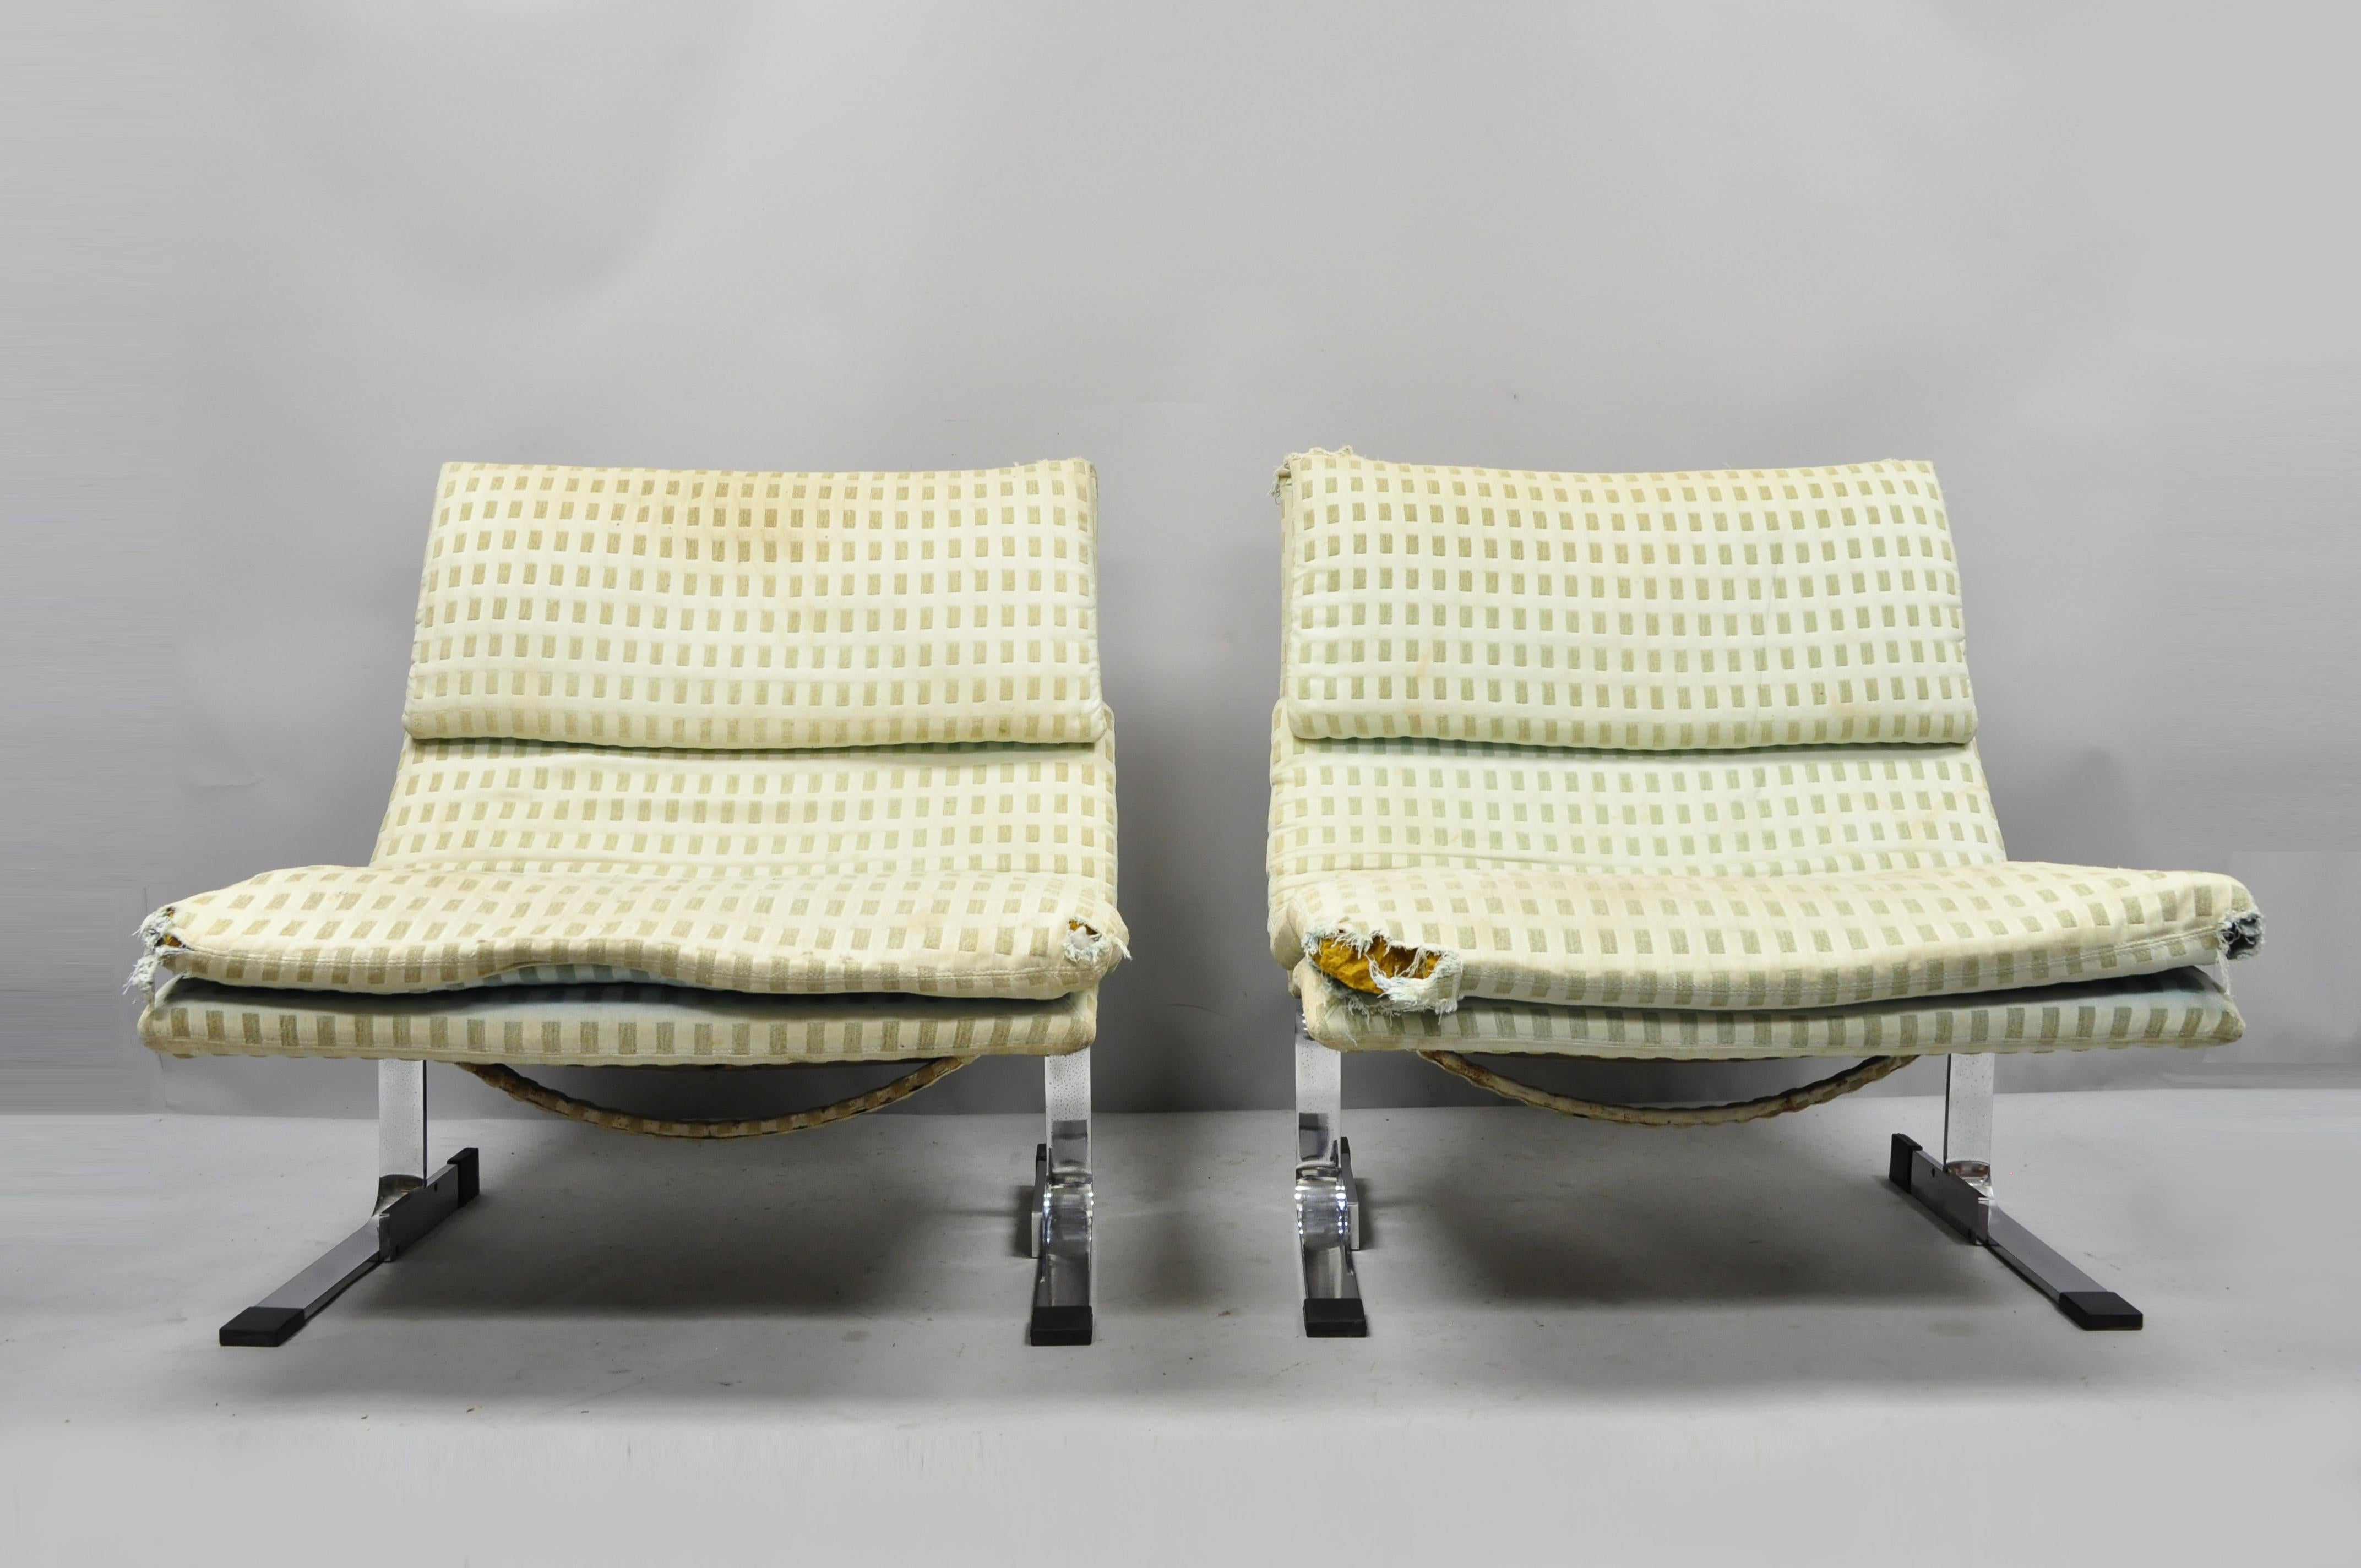 Pair of Italian chrome onda wave lounge chairs by Giovanni Offredi for Saporiti. Items feature large substantial size, heavy chrome plated steel frames, circa 1960s. Measurements: 33